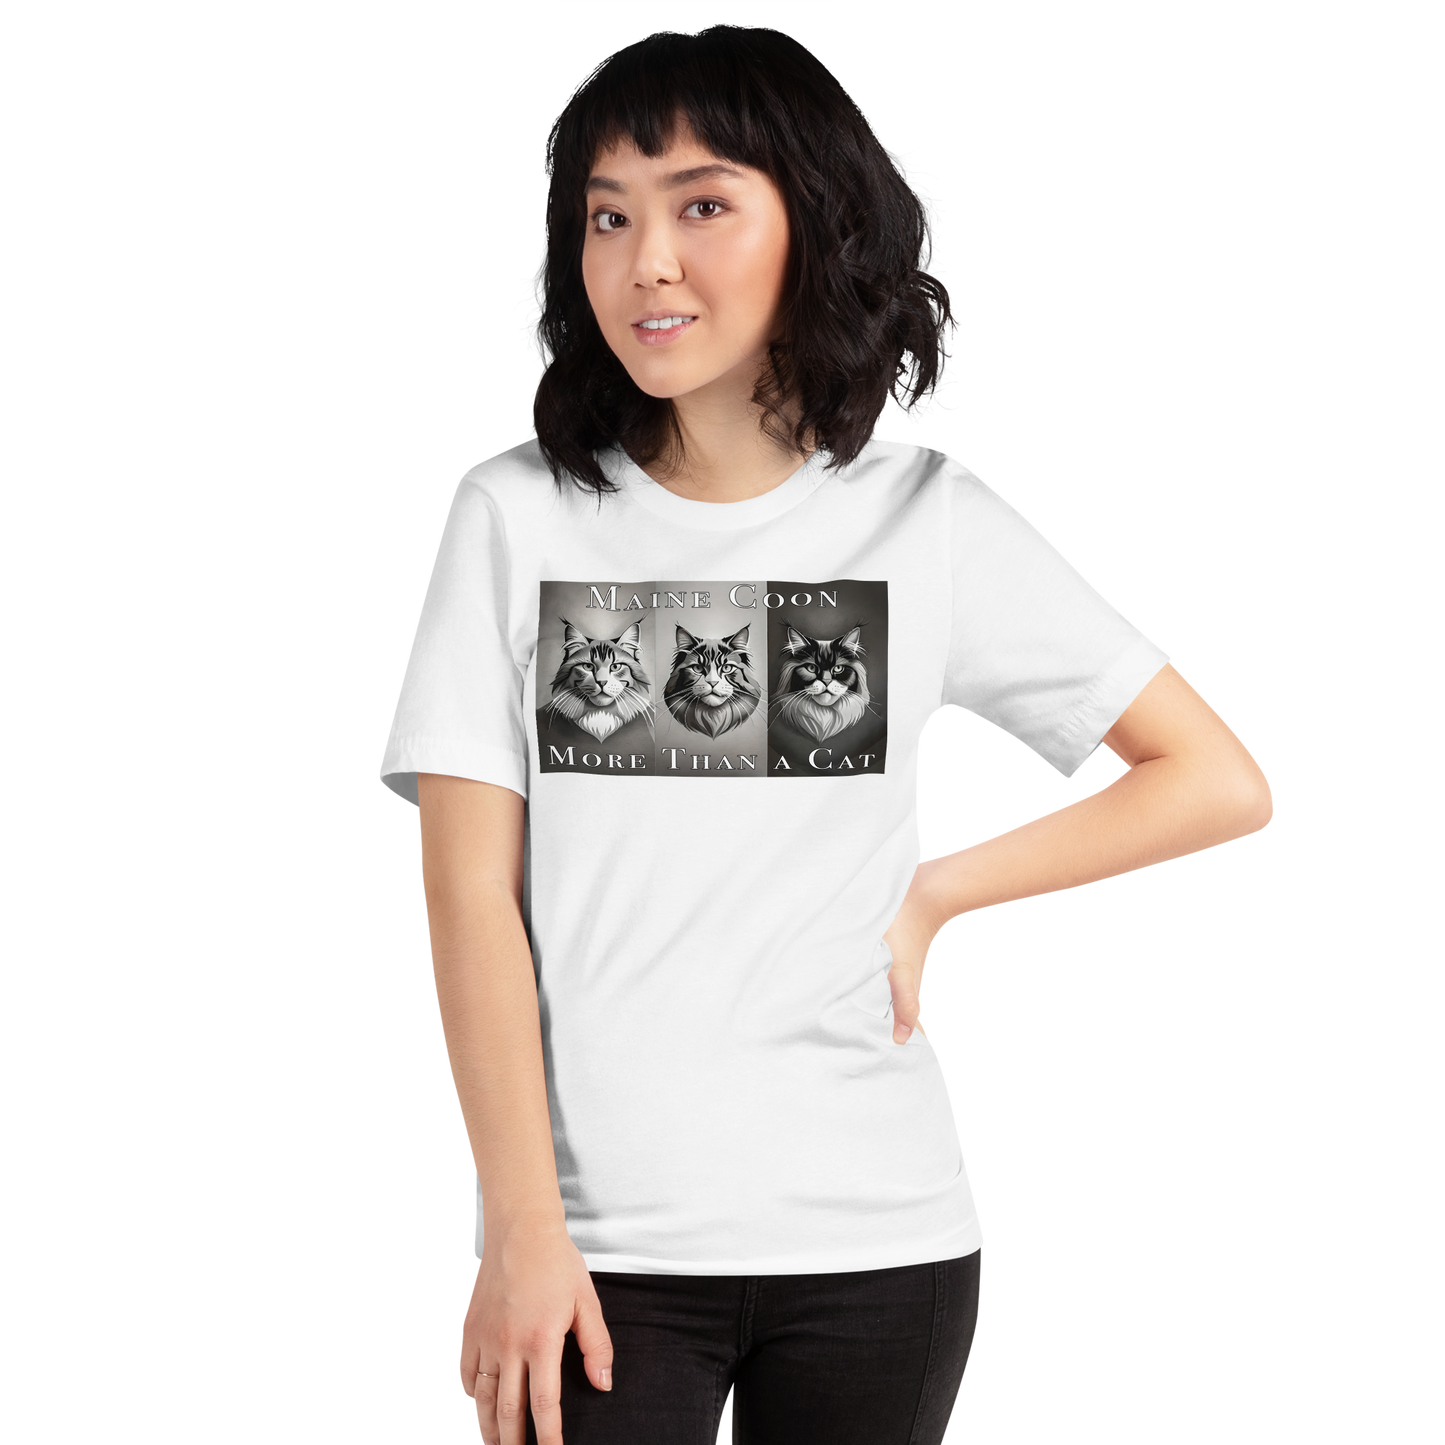 Unisex T-Shirt Maine Coon - 3 cats front print